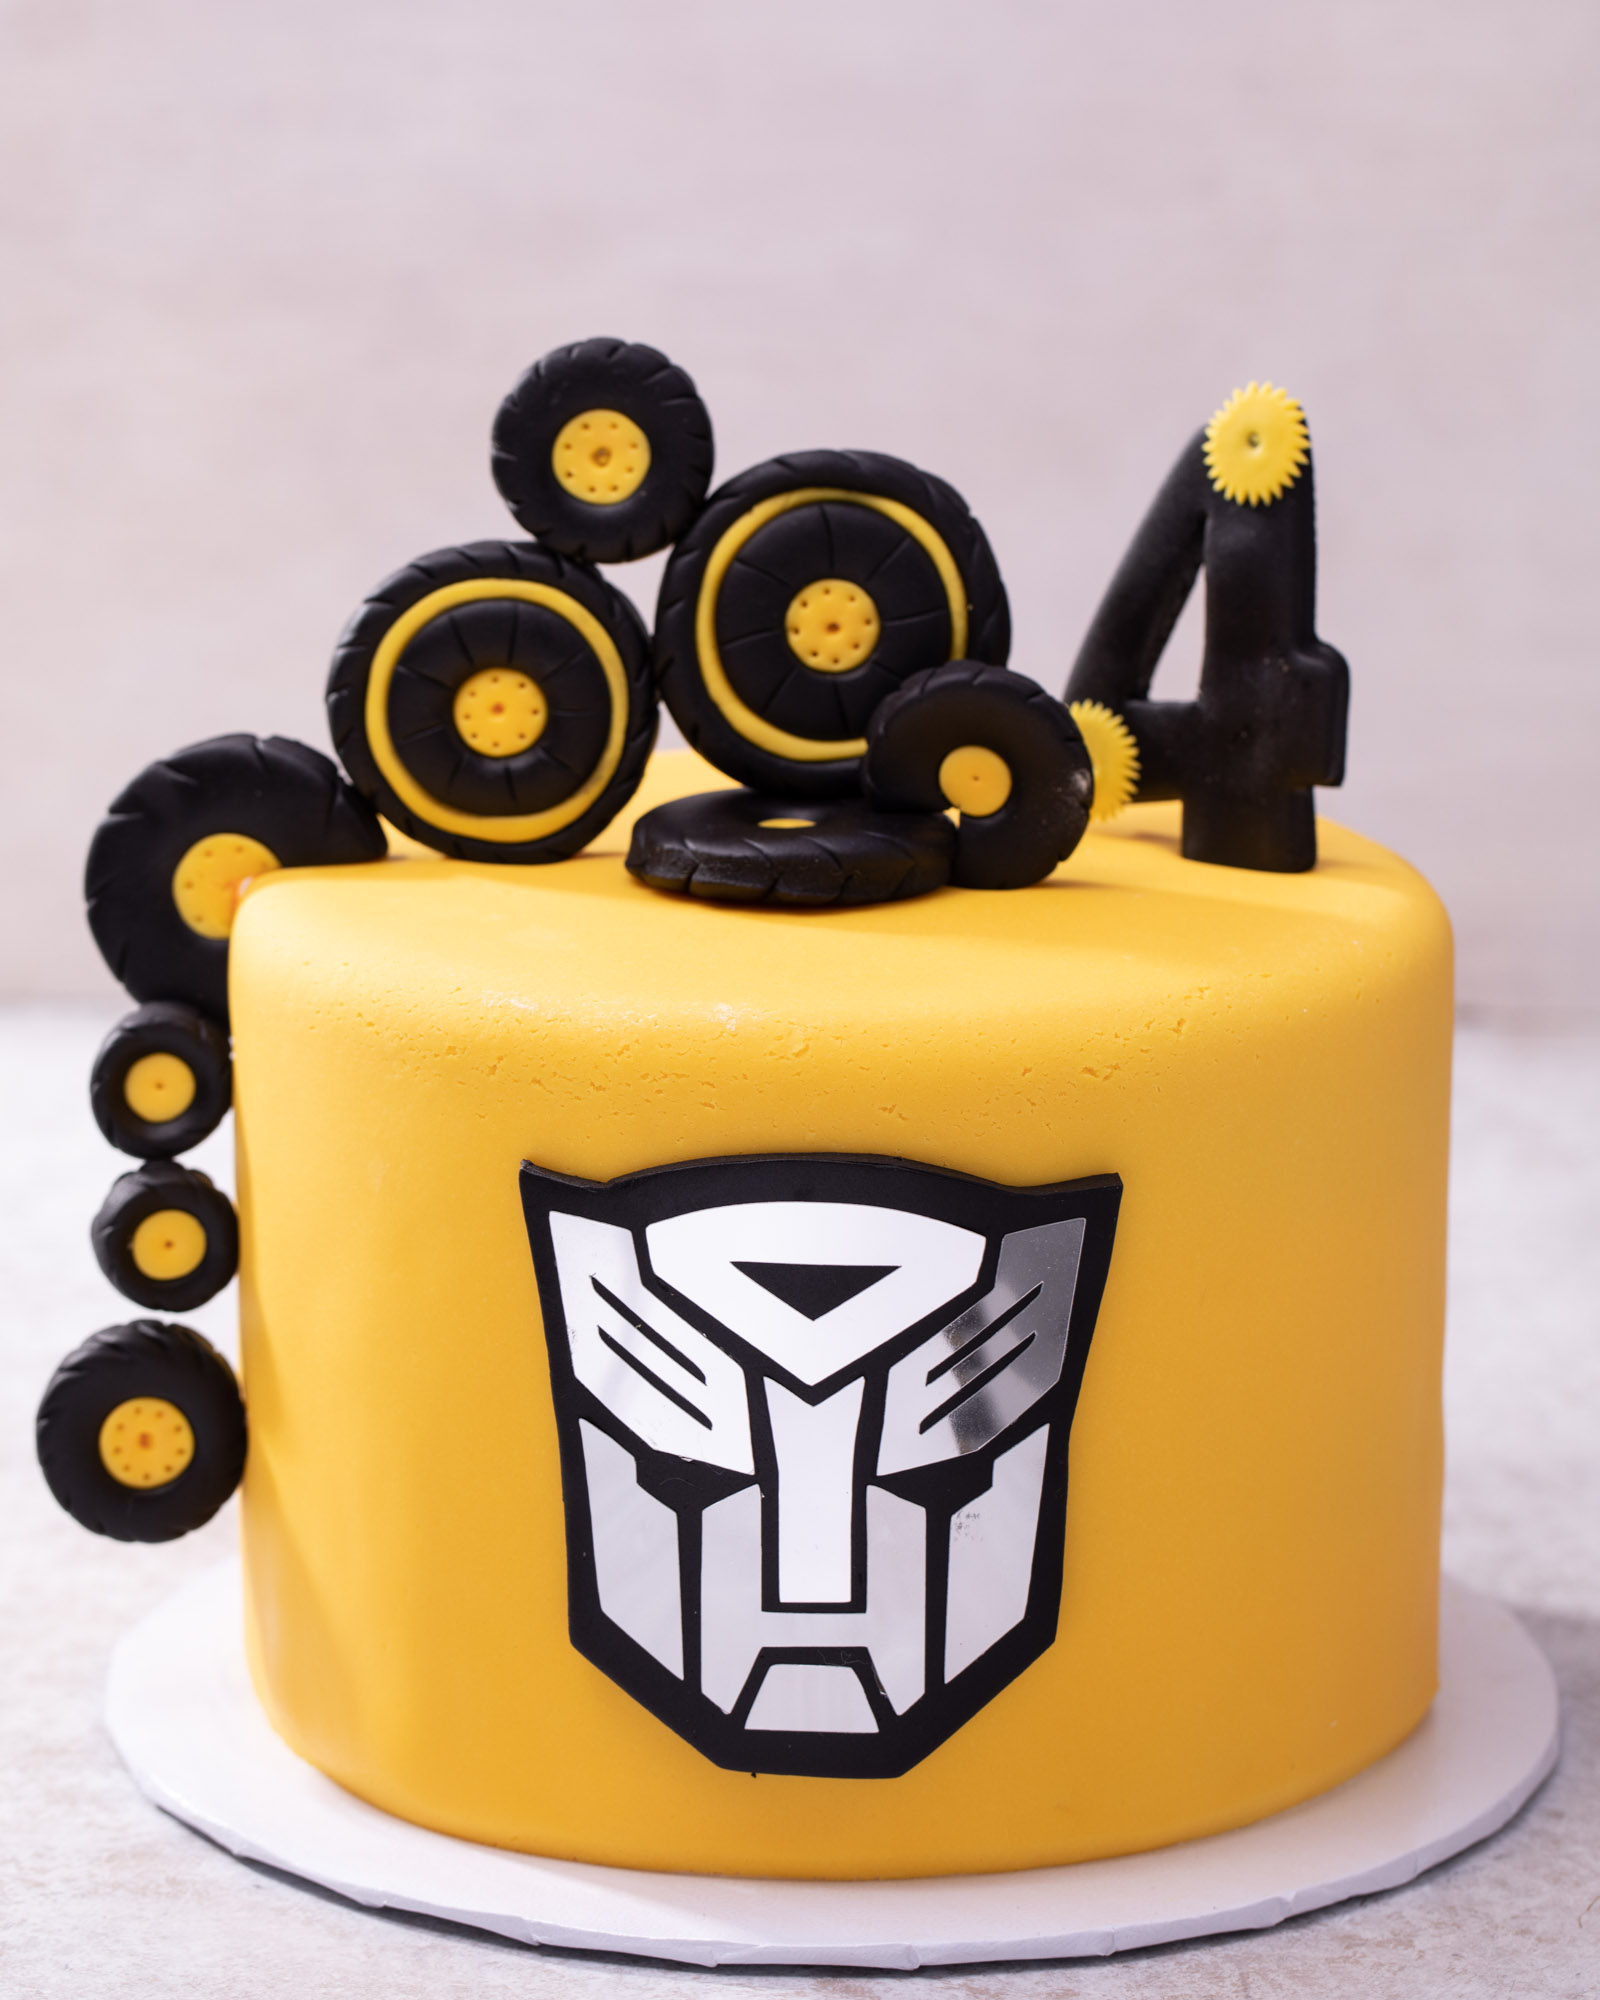 how to make a transformers cake - cakes for kids - YouTube